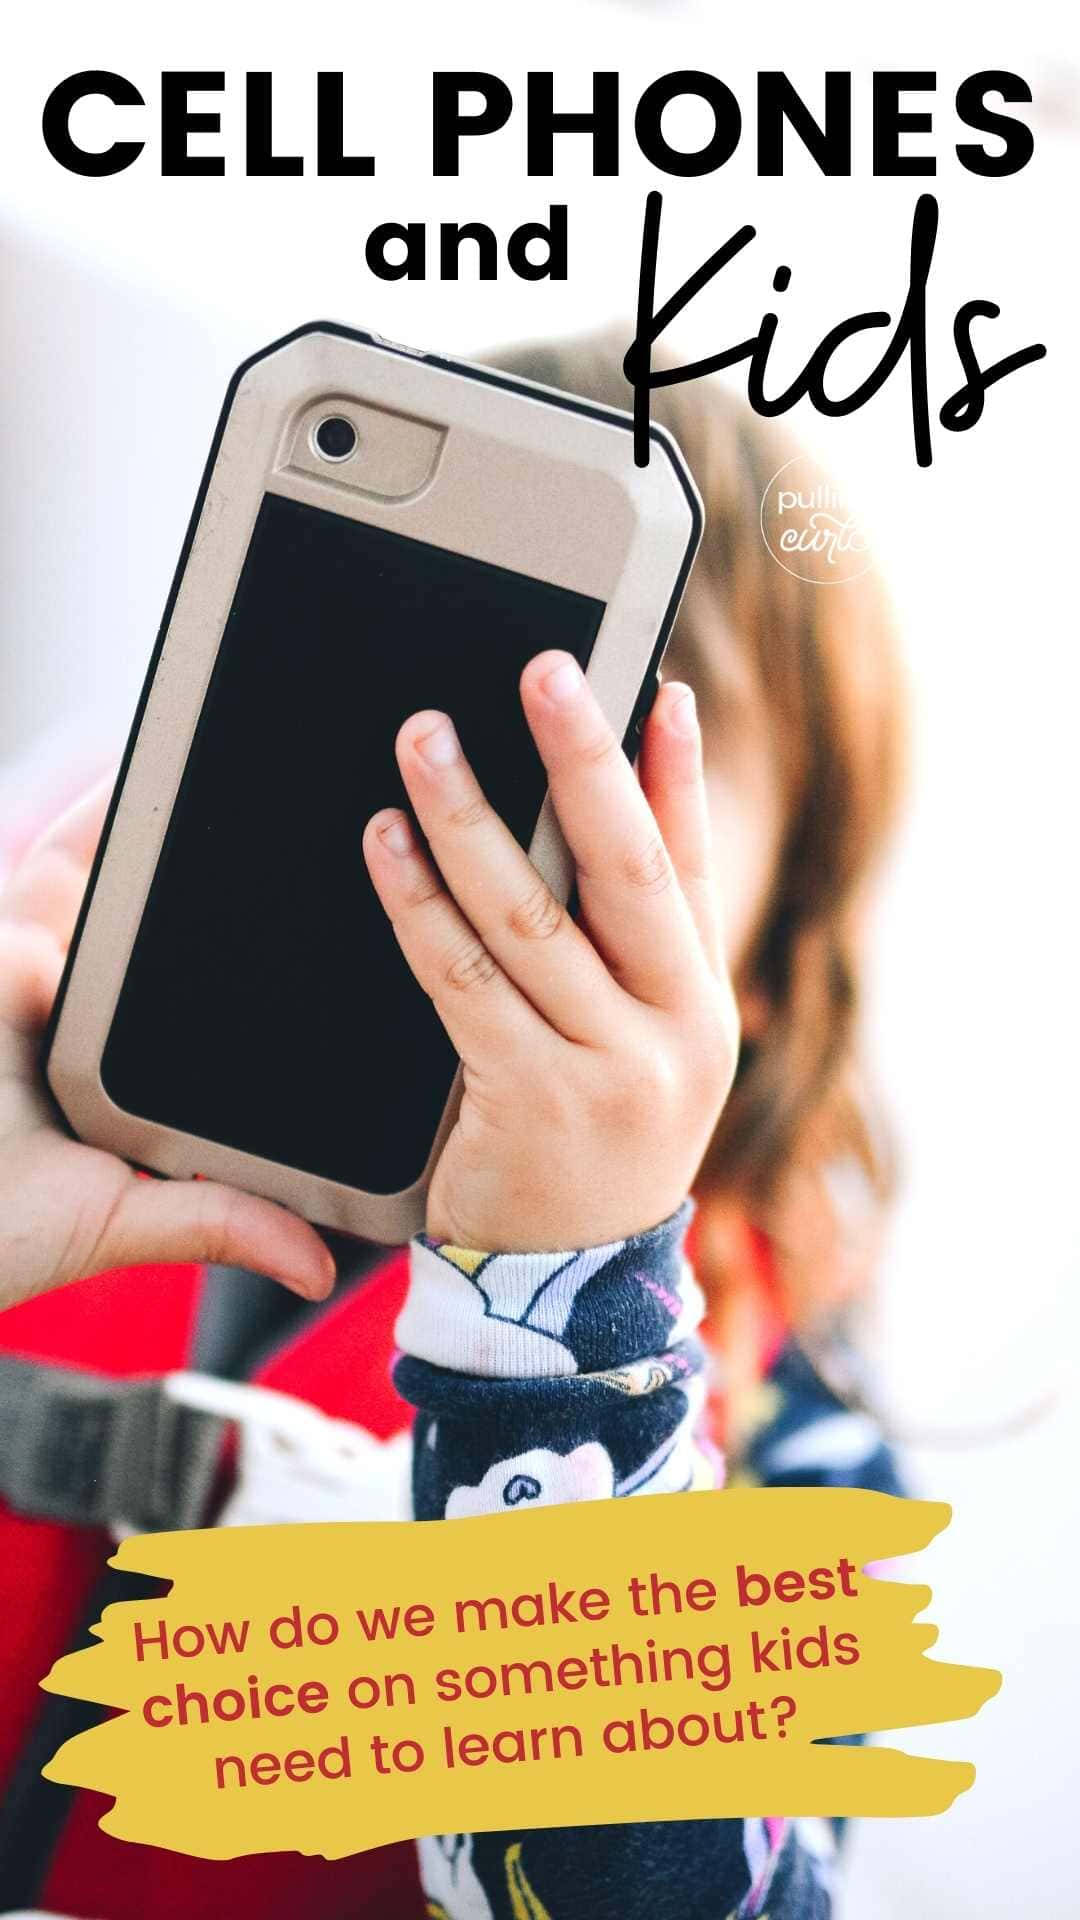 What age do you give a child a cell phone? What type of phone do you get them, and how do you help them manage that new device. What brand of cell phone is best for kids? Let's talk about it. via @pullingcurls